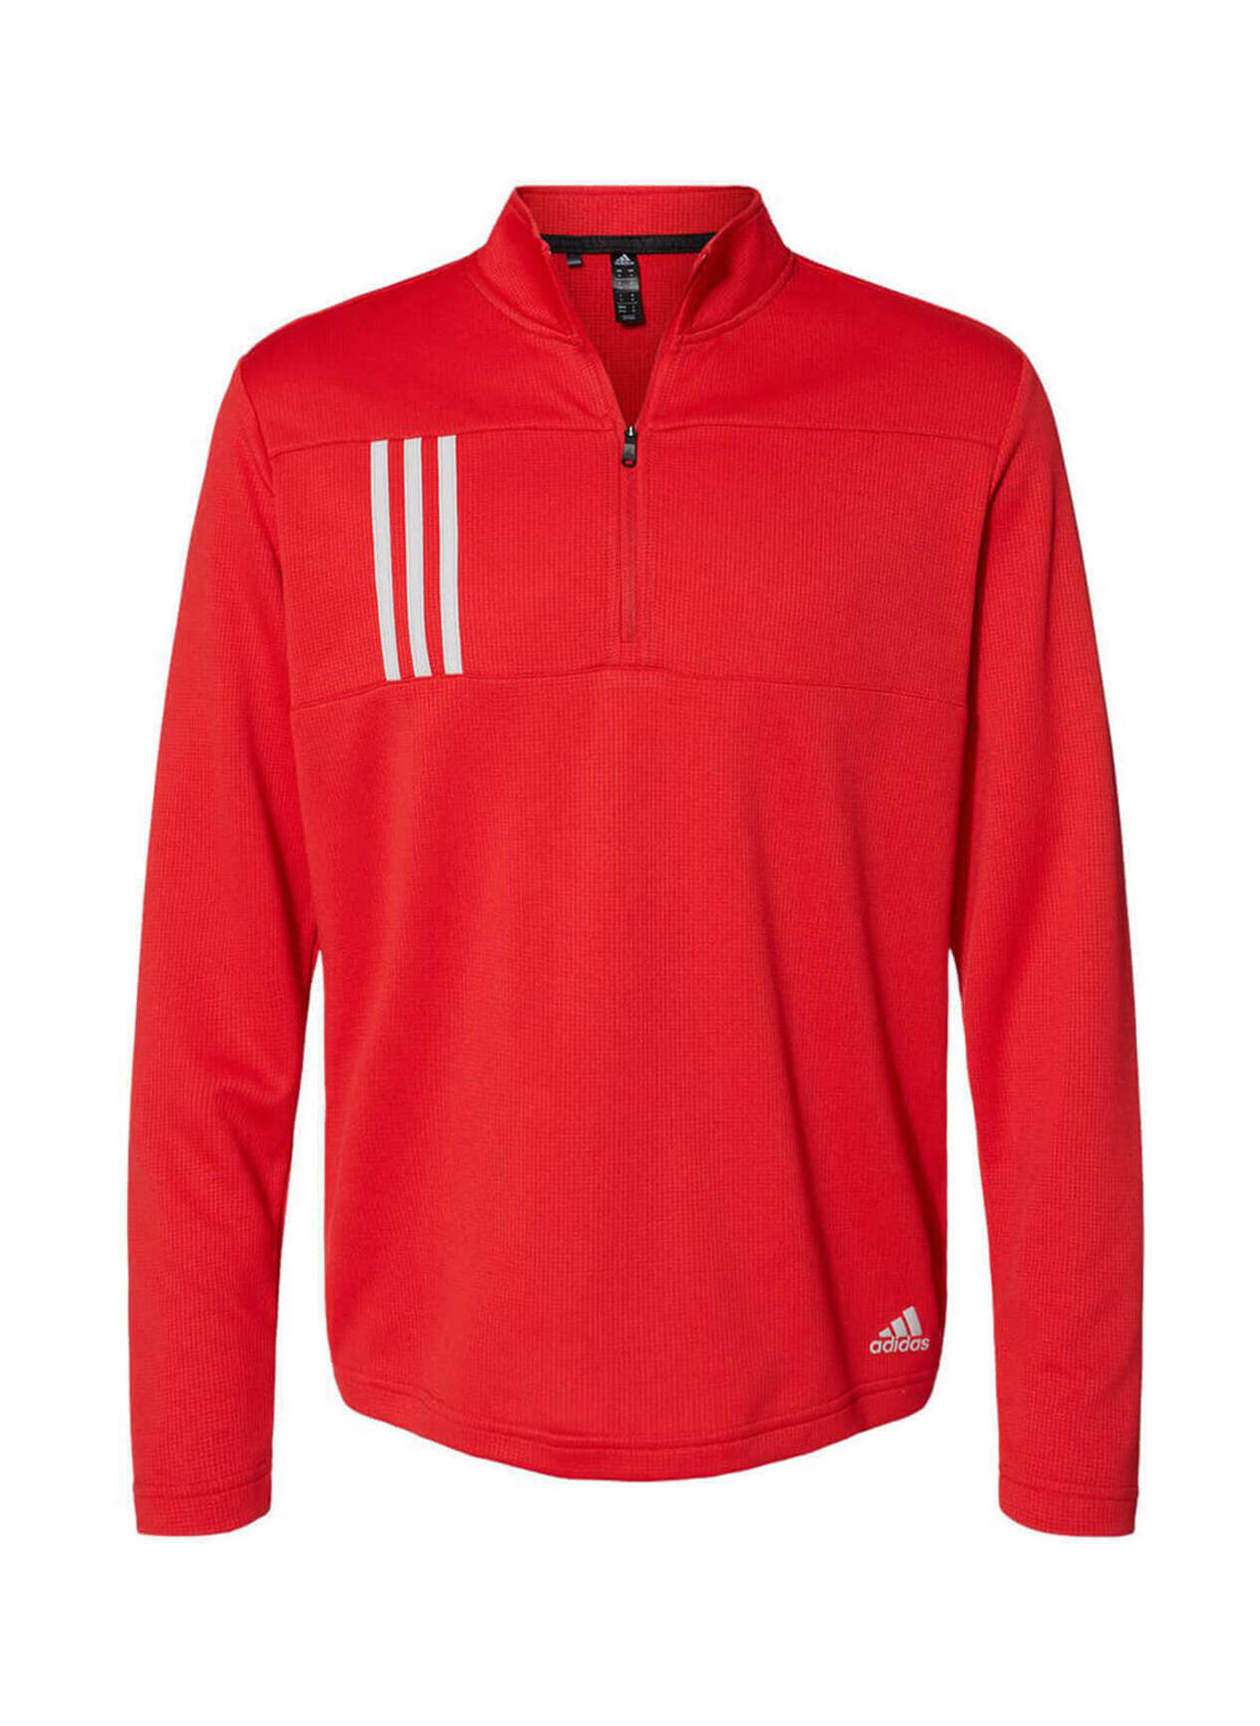 Men's Team Collegiate Red / Grey Two Adidas 3-Stripes Double Knit Quarter-Zip Pullover